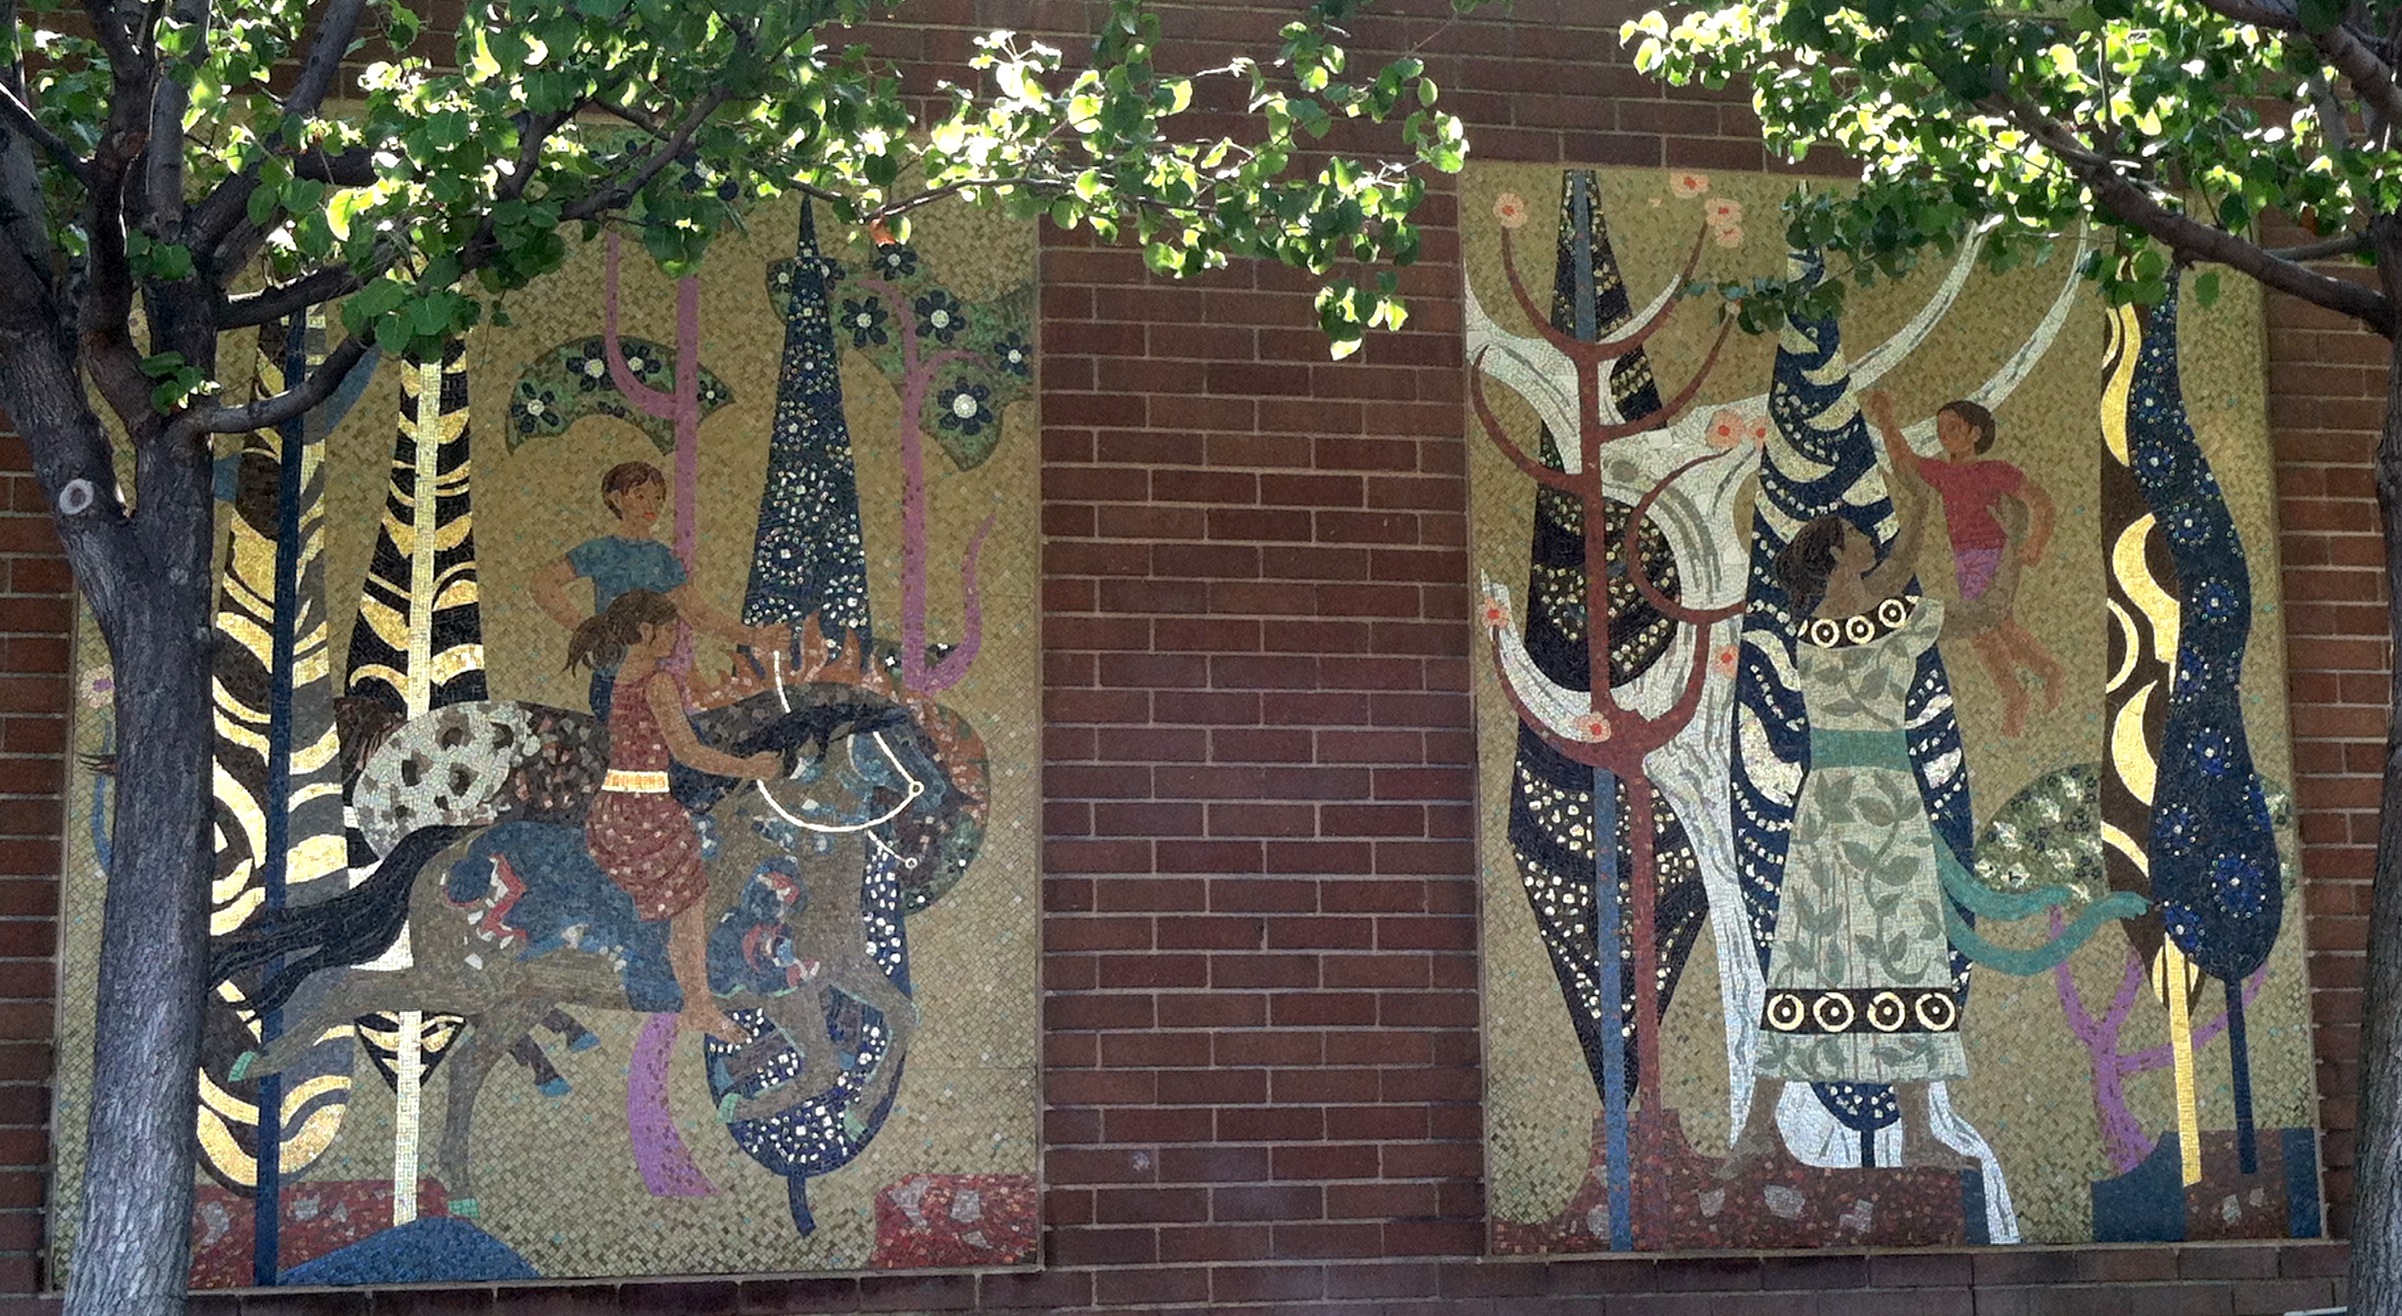 "Millard Sheets Designs," temporary mosaic panel, two of three shown, c. 1974, now in Irwindale